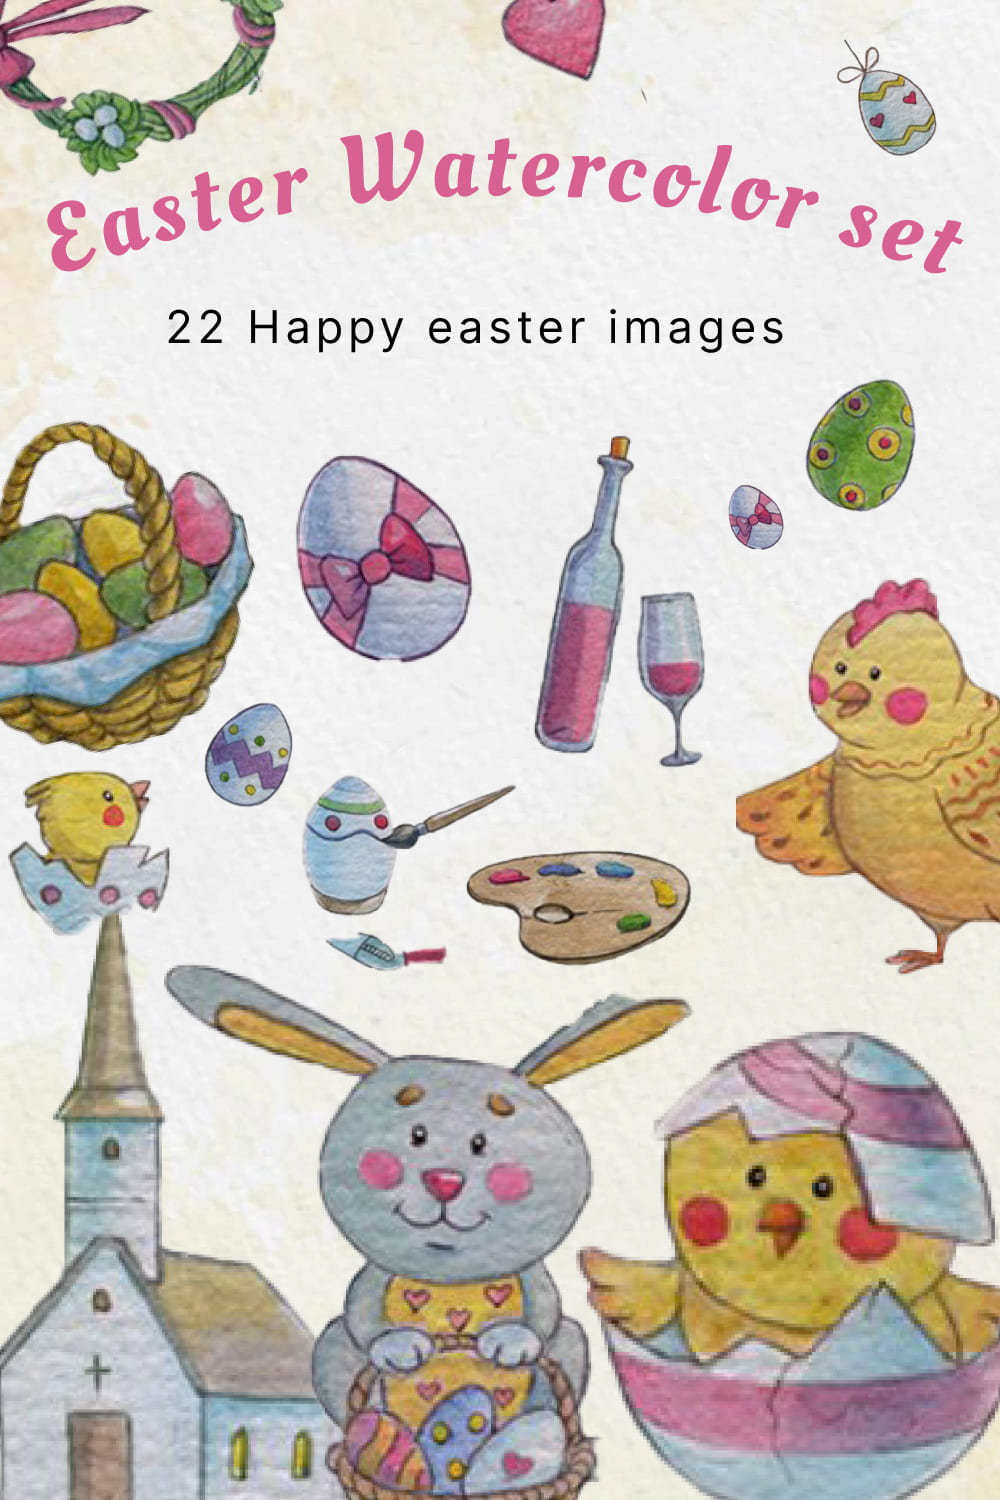 Easter watercolor set free fonts.